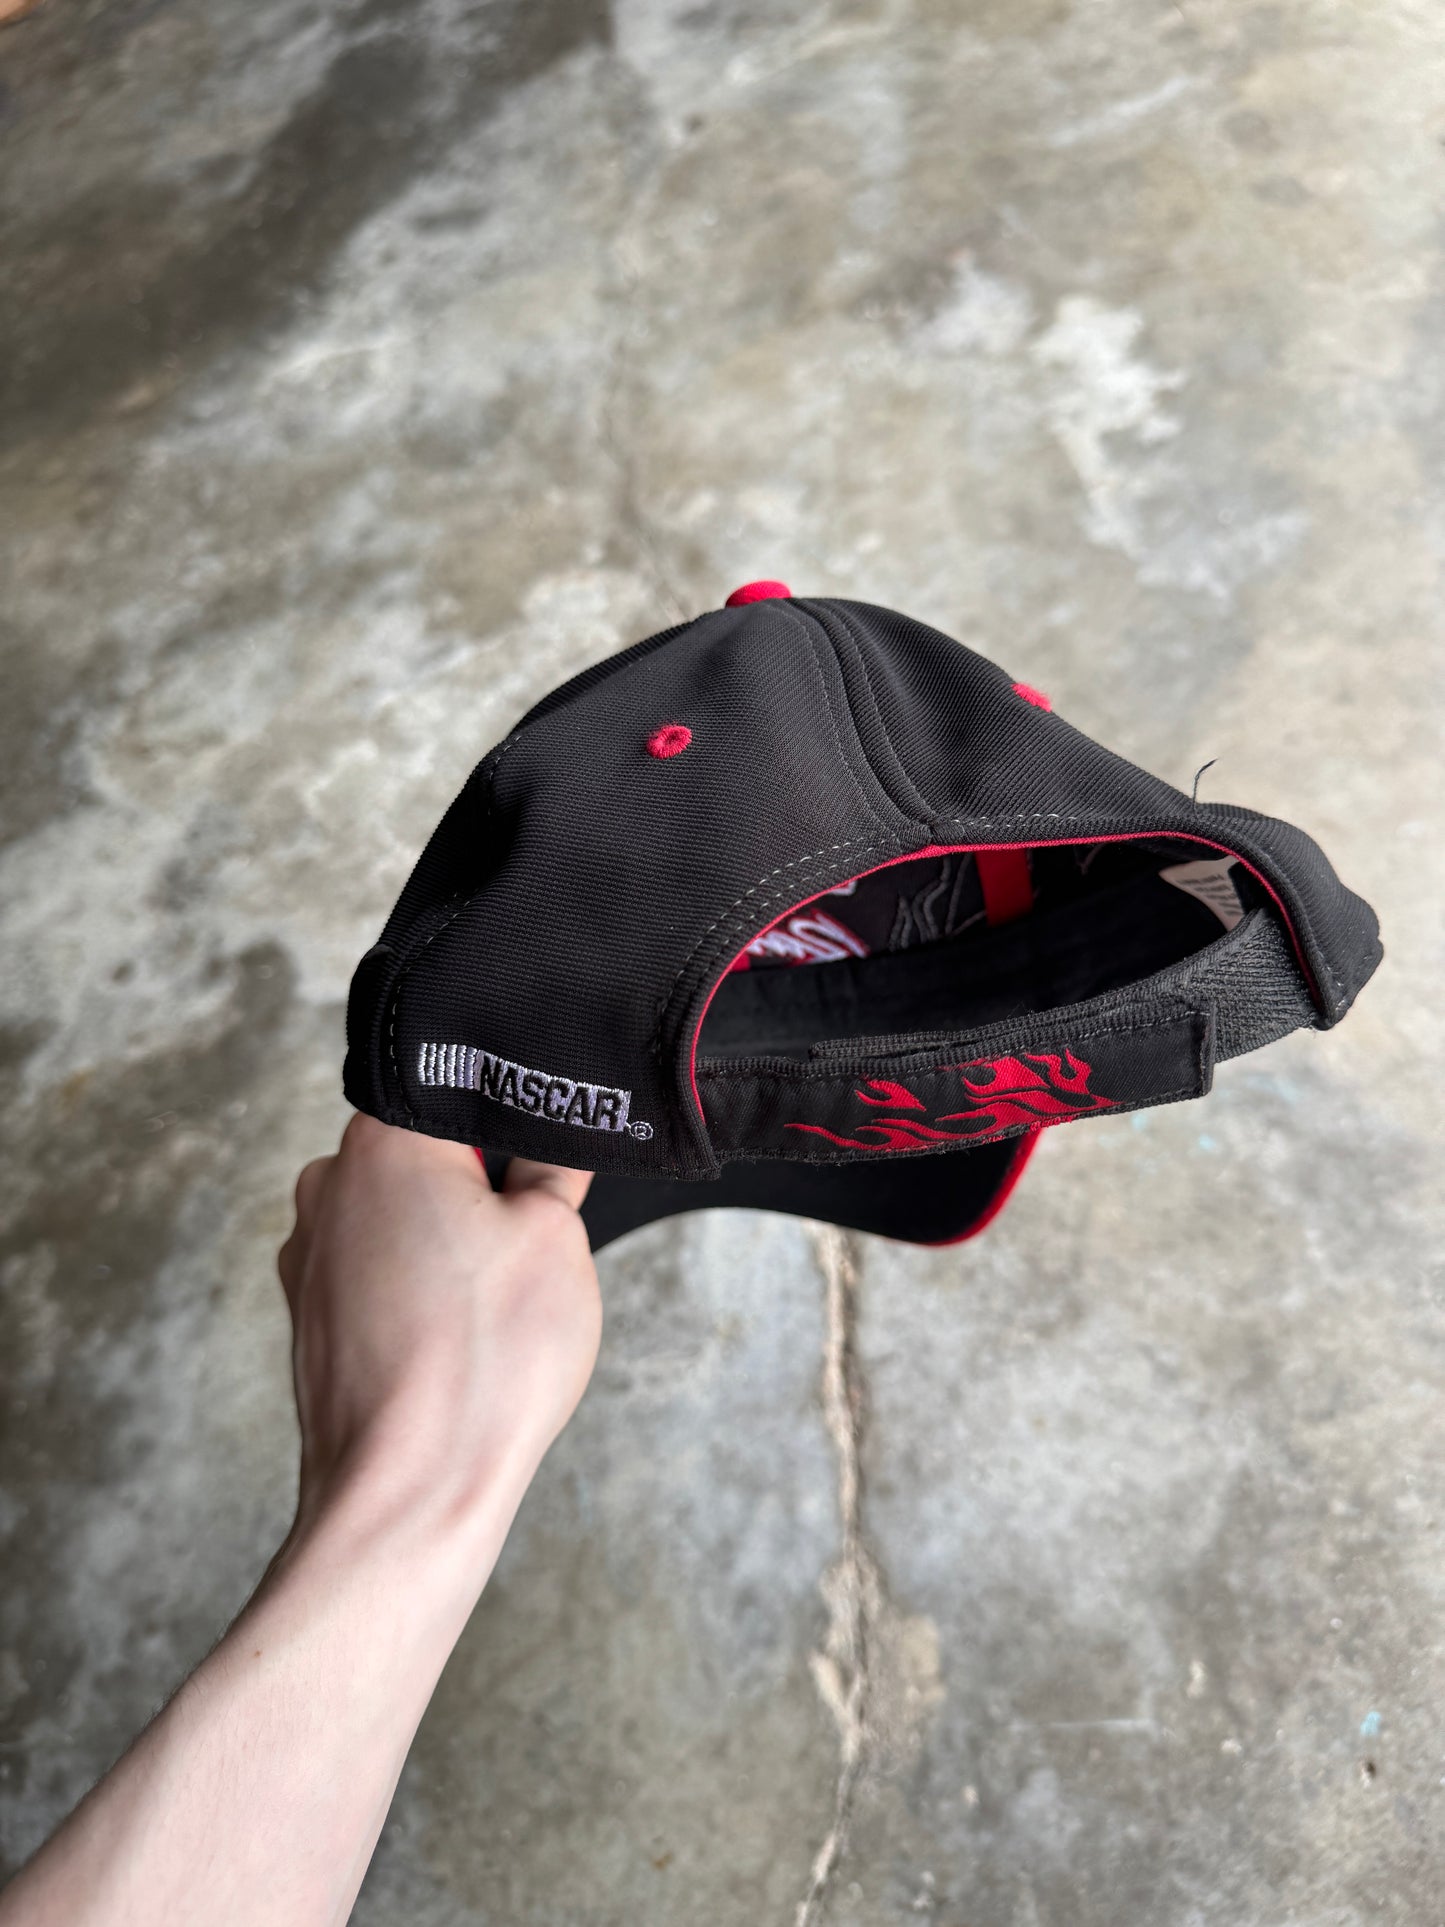 (OS) Chevy Racing Flames Hat